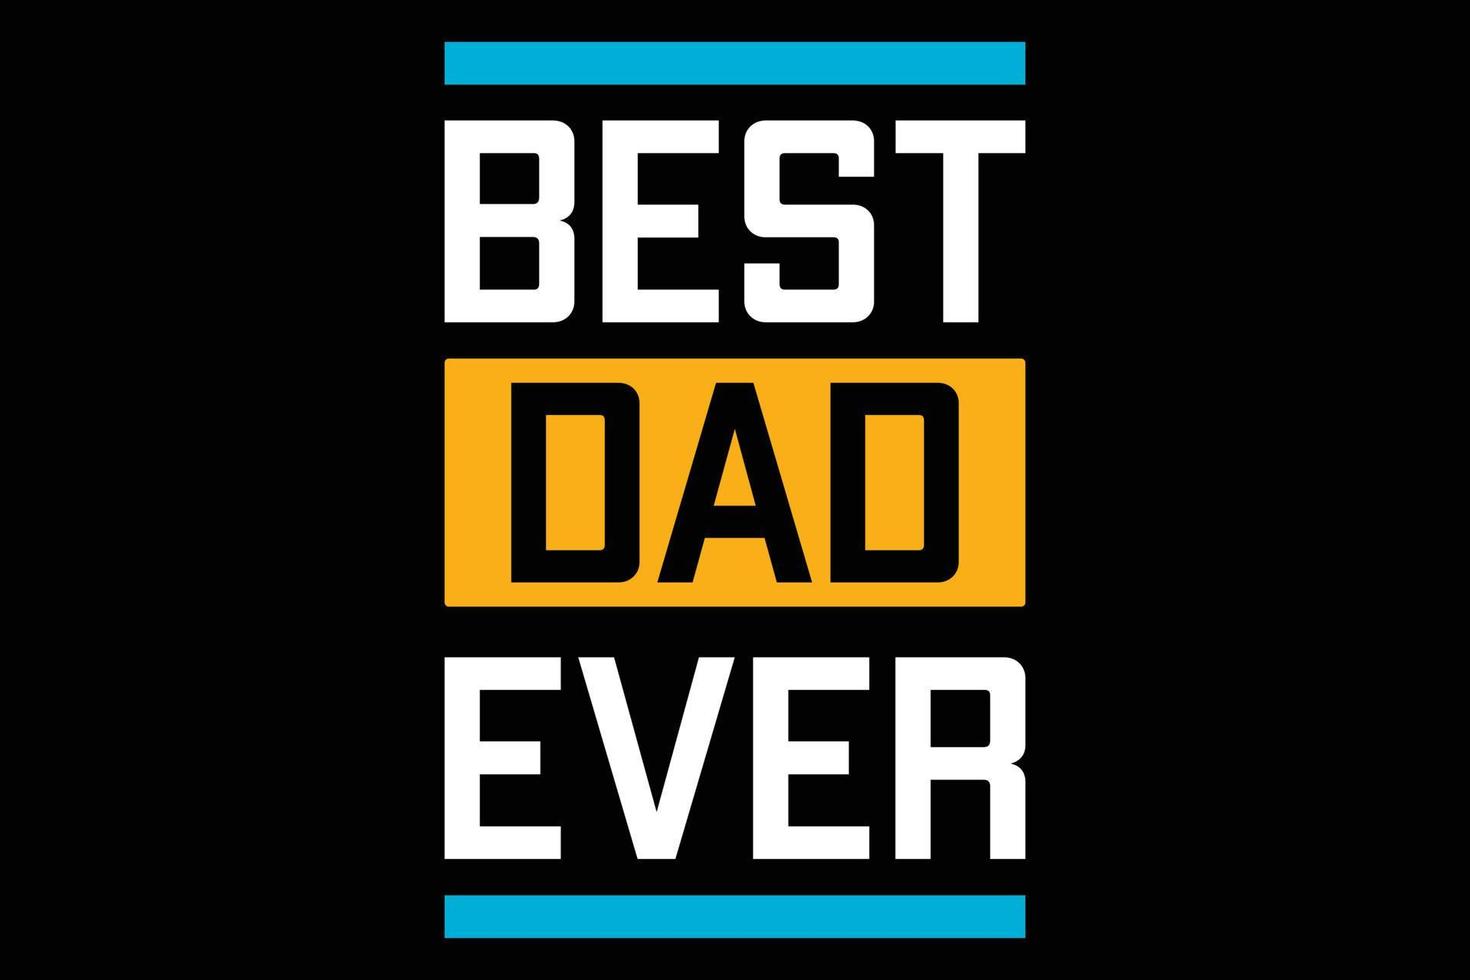 Best dad ever fathers day t-shirt design. vector